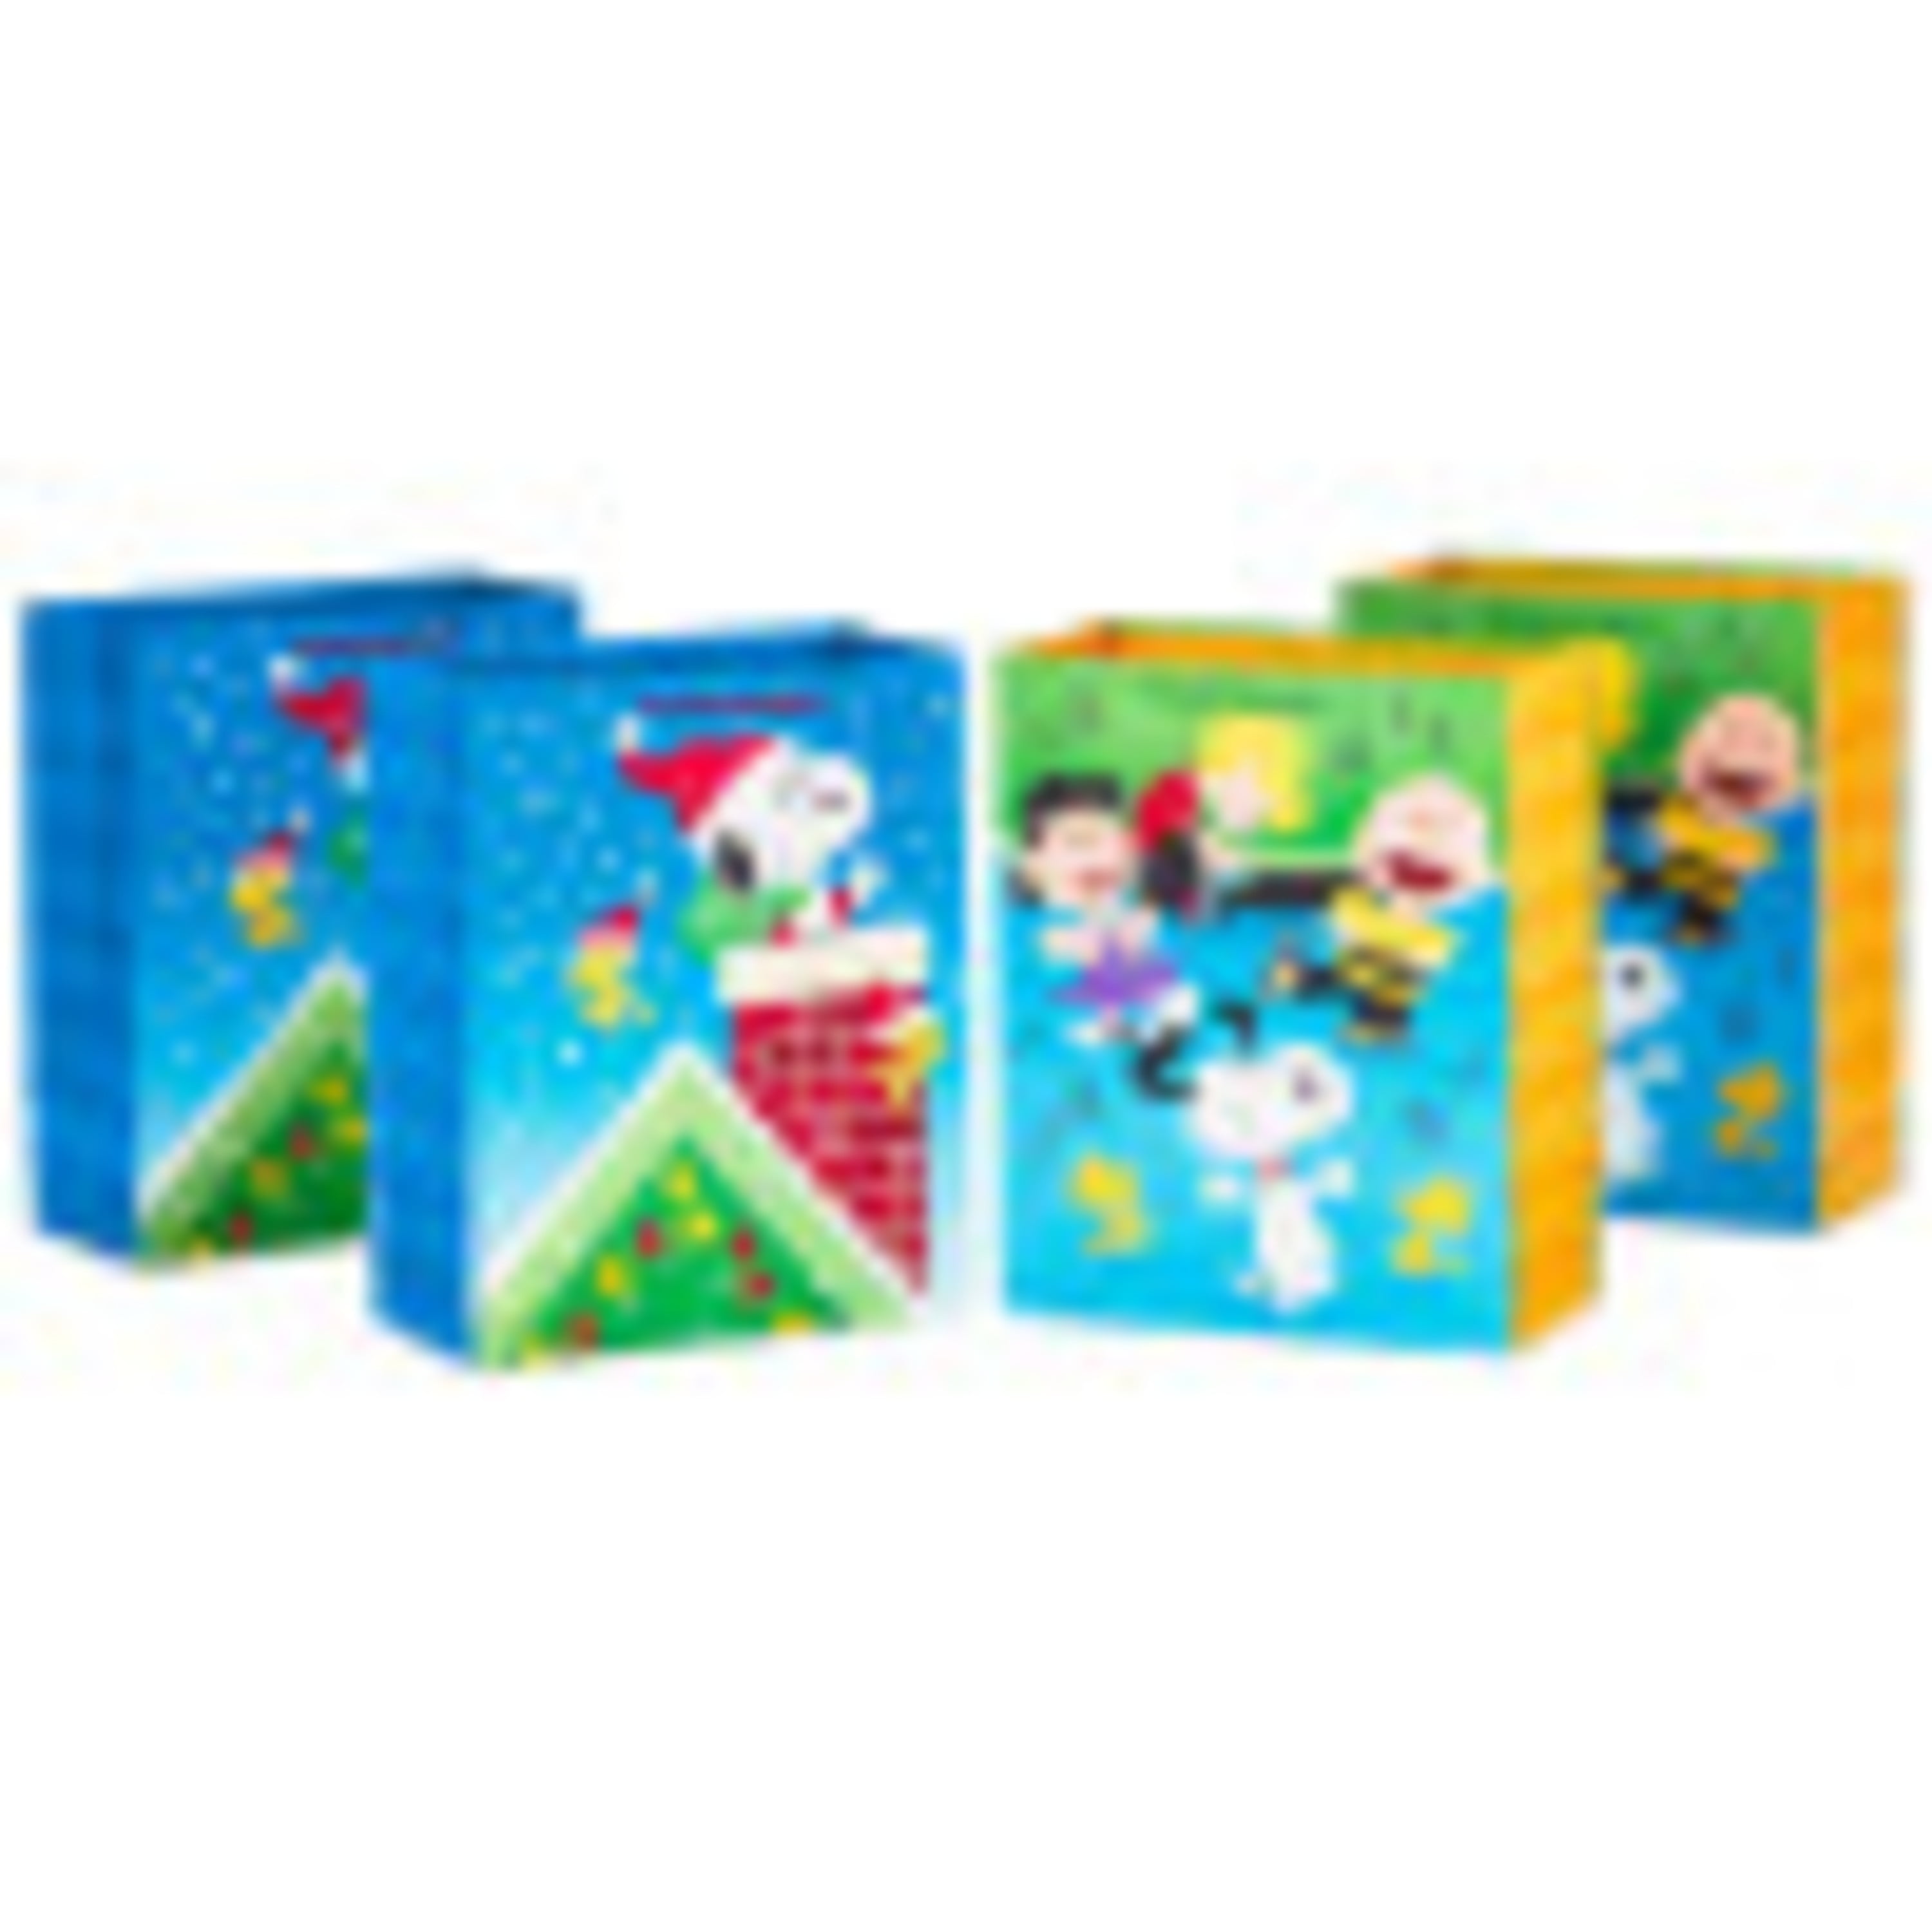 Snoopy carrying gift boxes Gift Tag - Shop